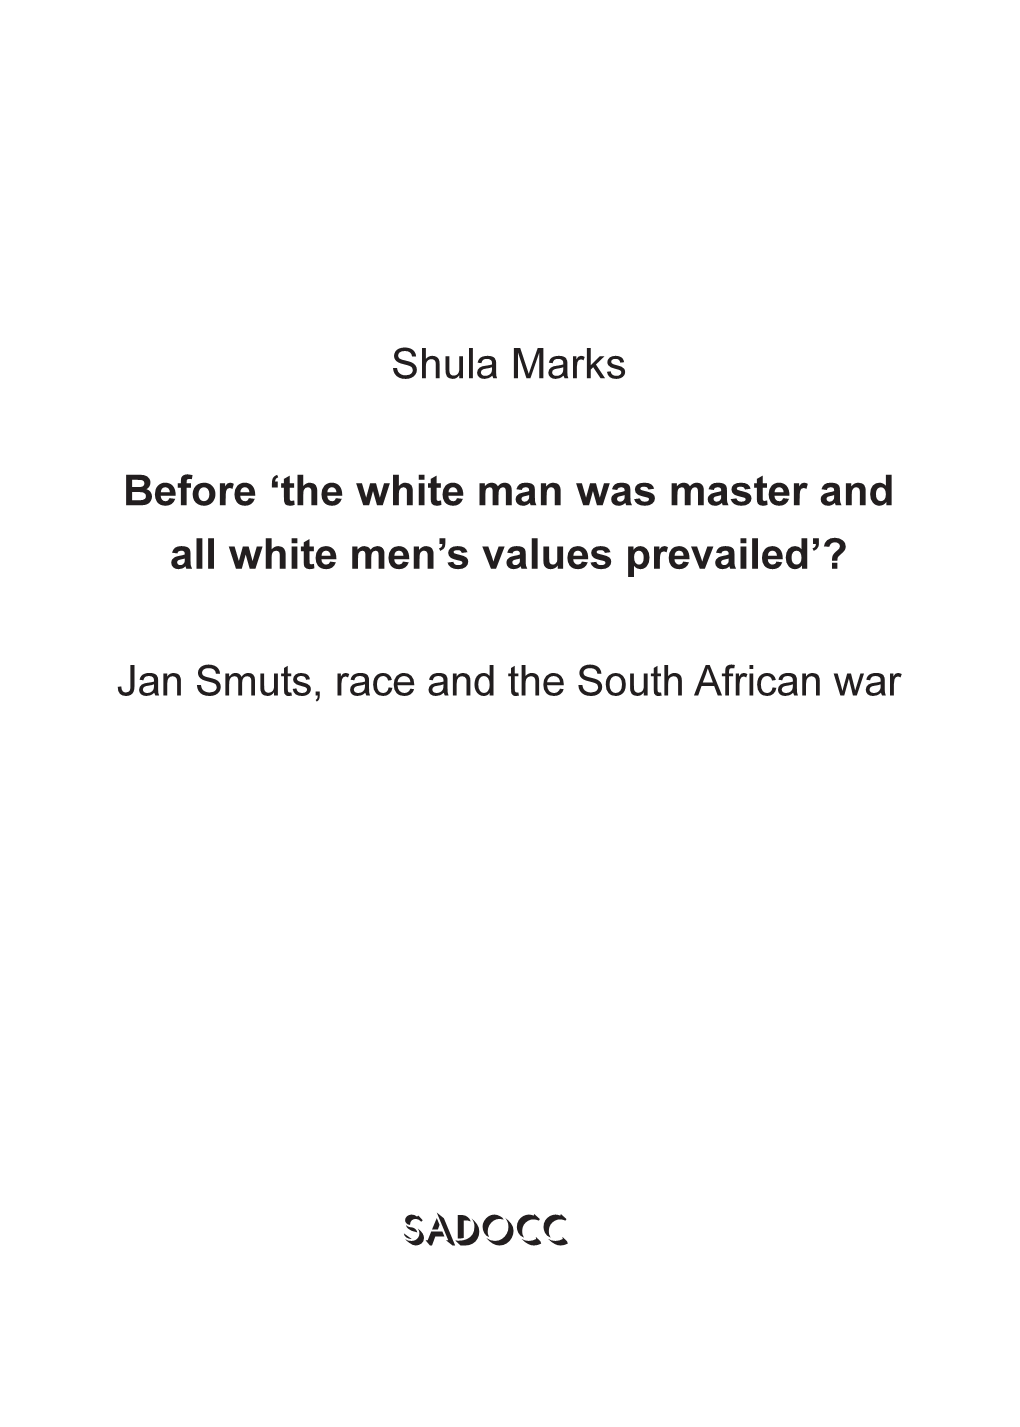 Jan Smuts, Race and the South African War